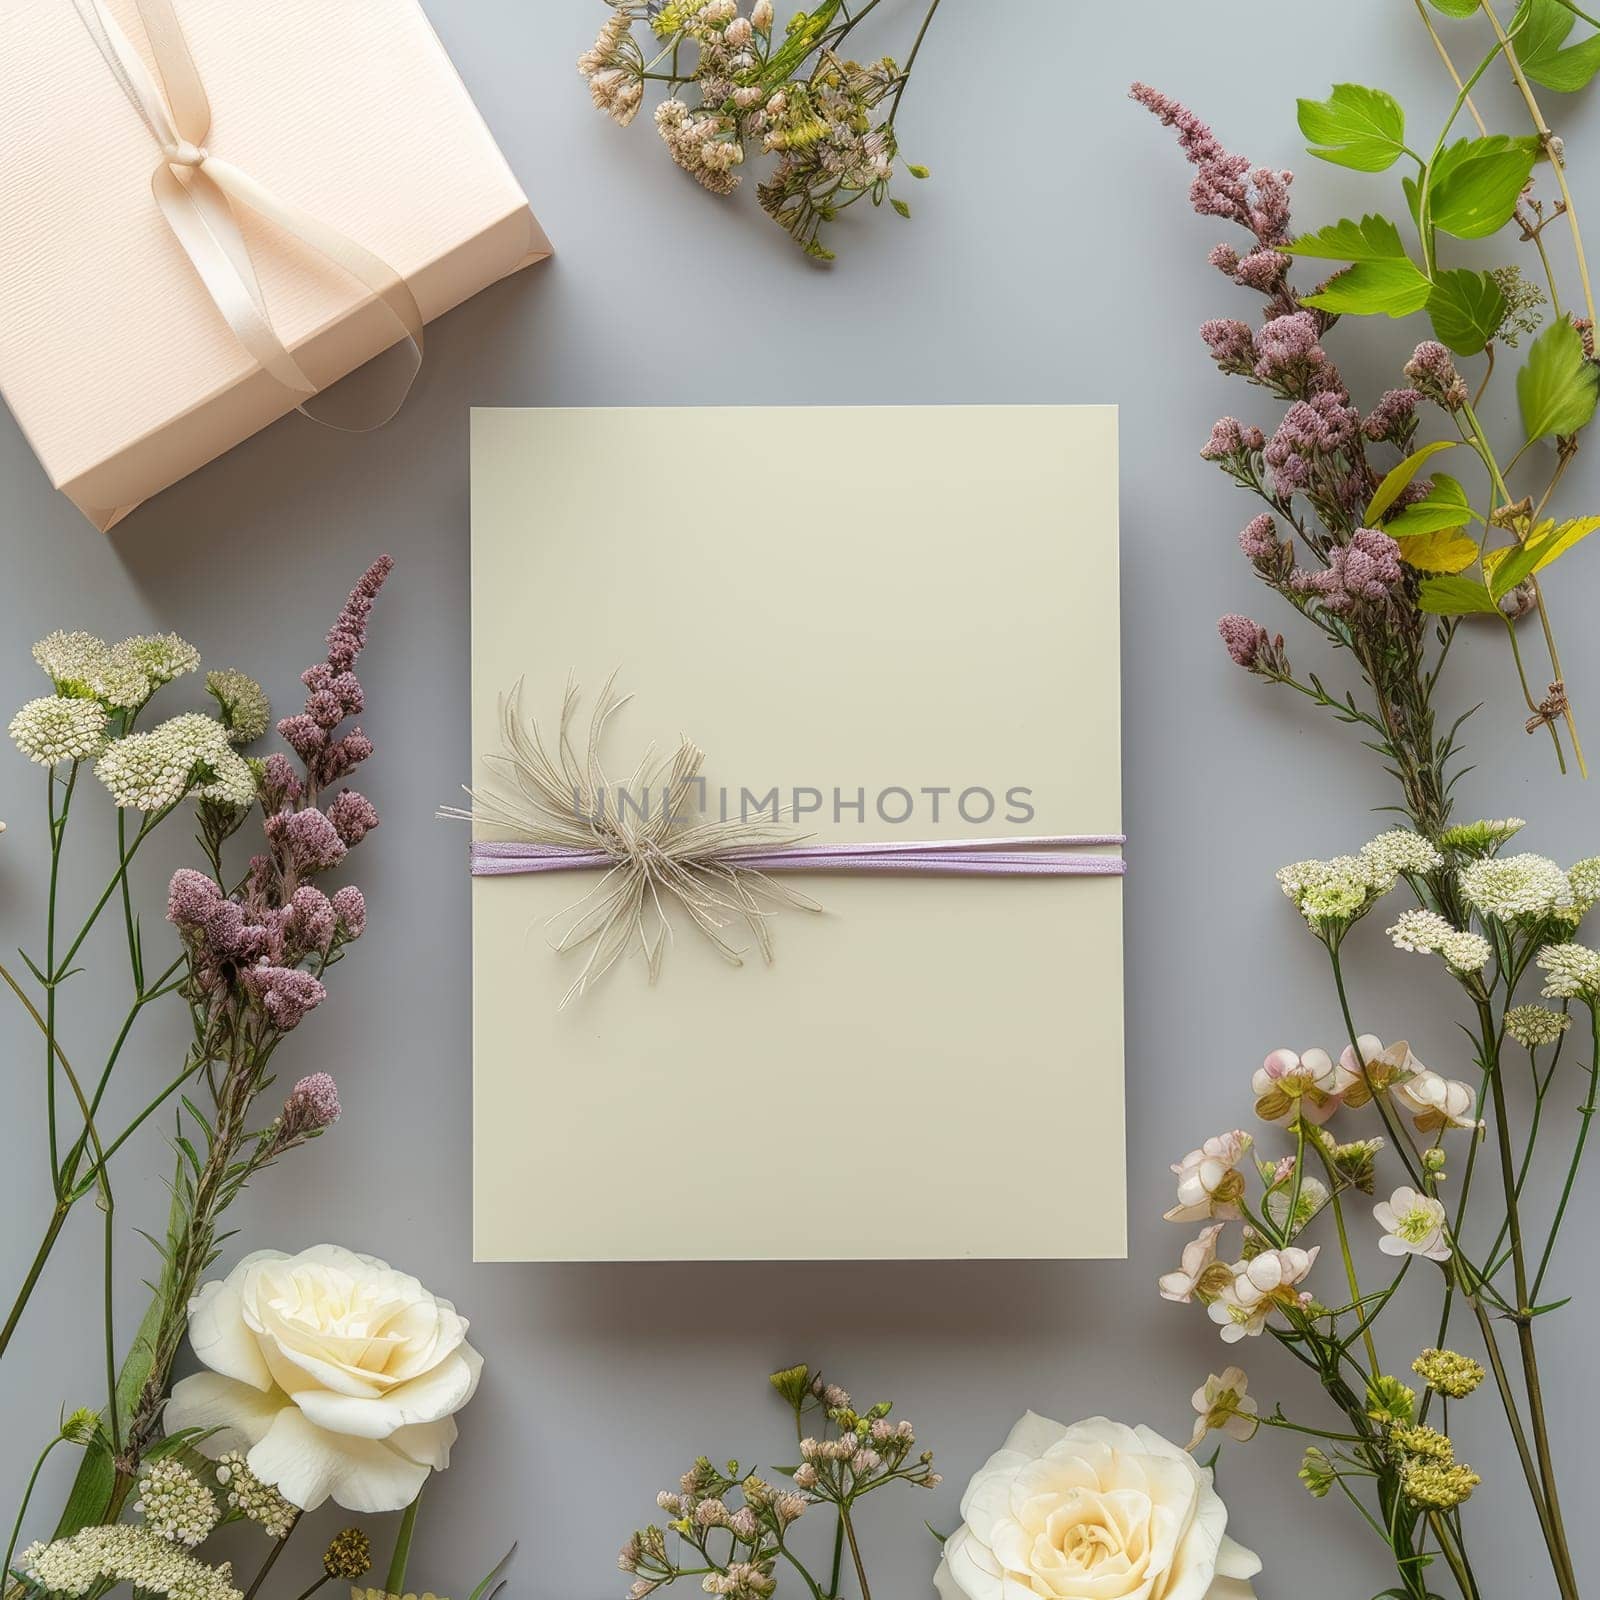 A neutral-toned card, tied with a lavender ribbon and adorned with a delicate feather, lies amongst a vibrant selection of wildflowers and an elegant gift box. Serene and organic elegance